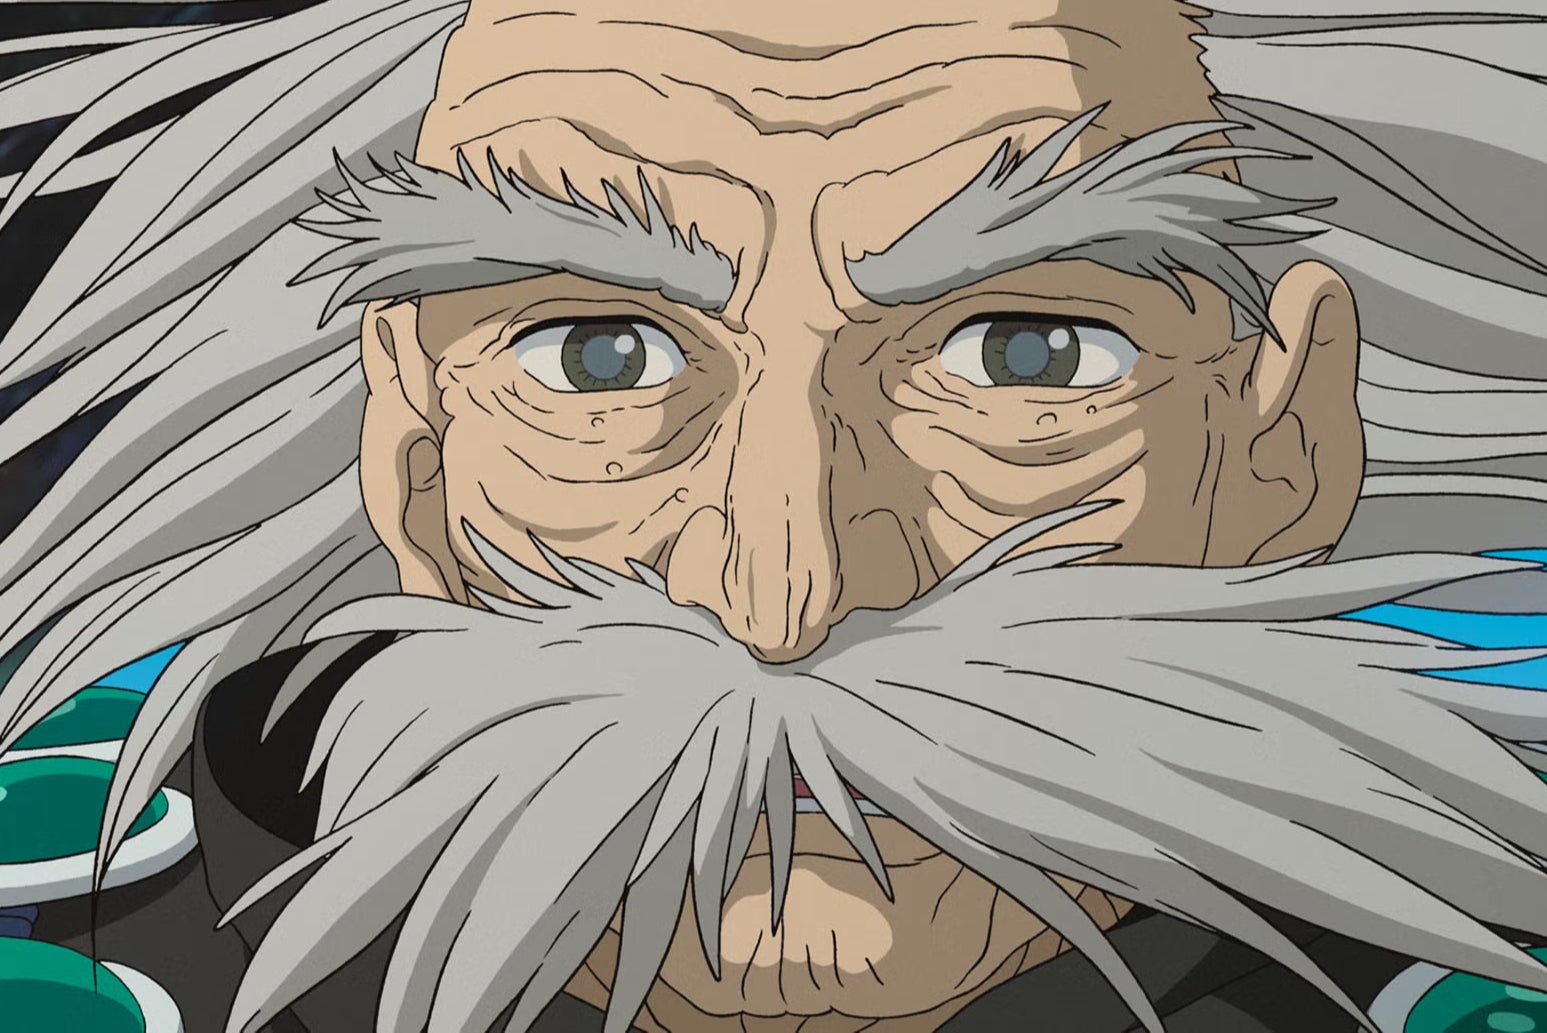 The Granduncle figure in ‘The Boy and the Heron’ has been likened by some to Miyazaki himself